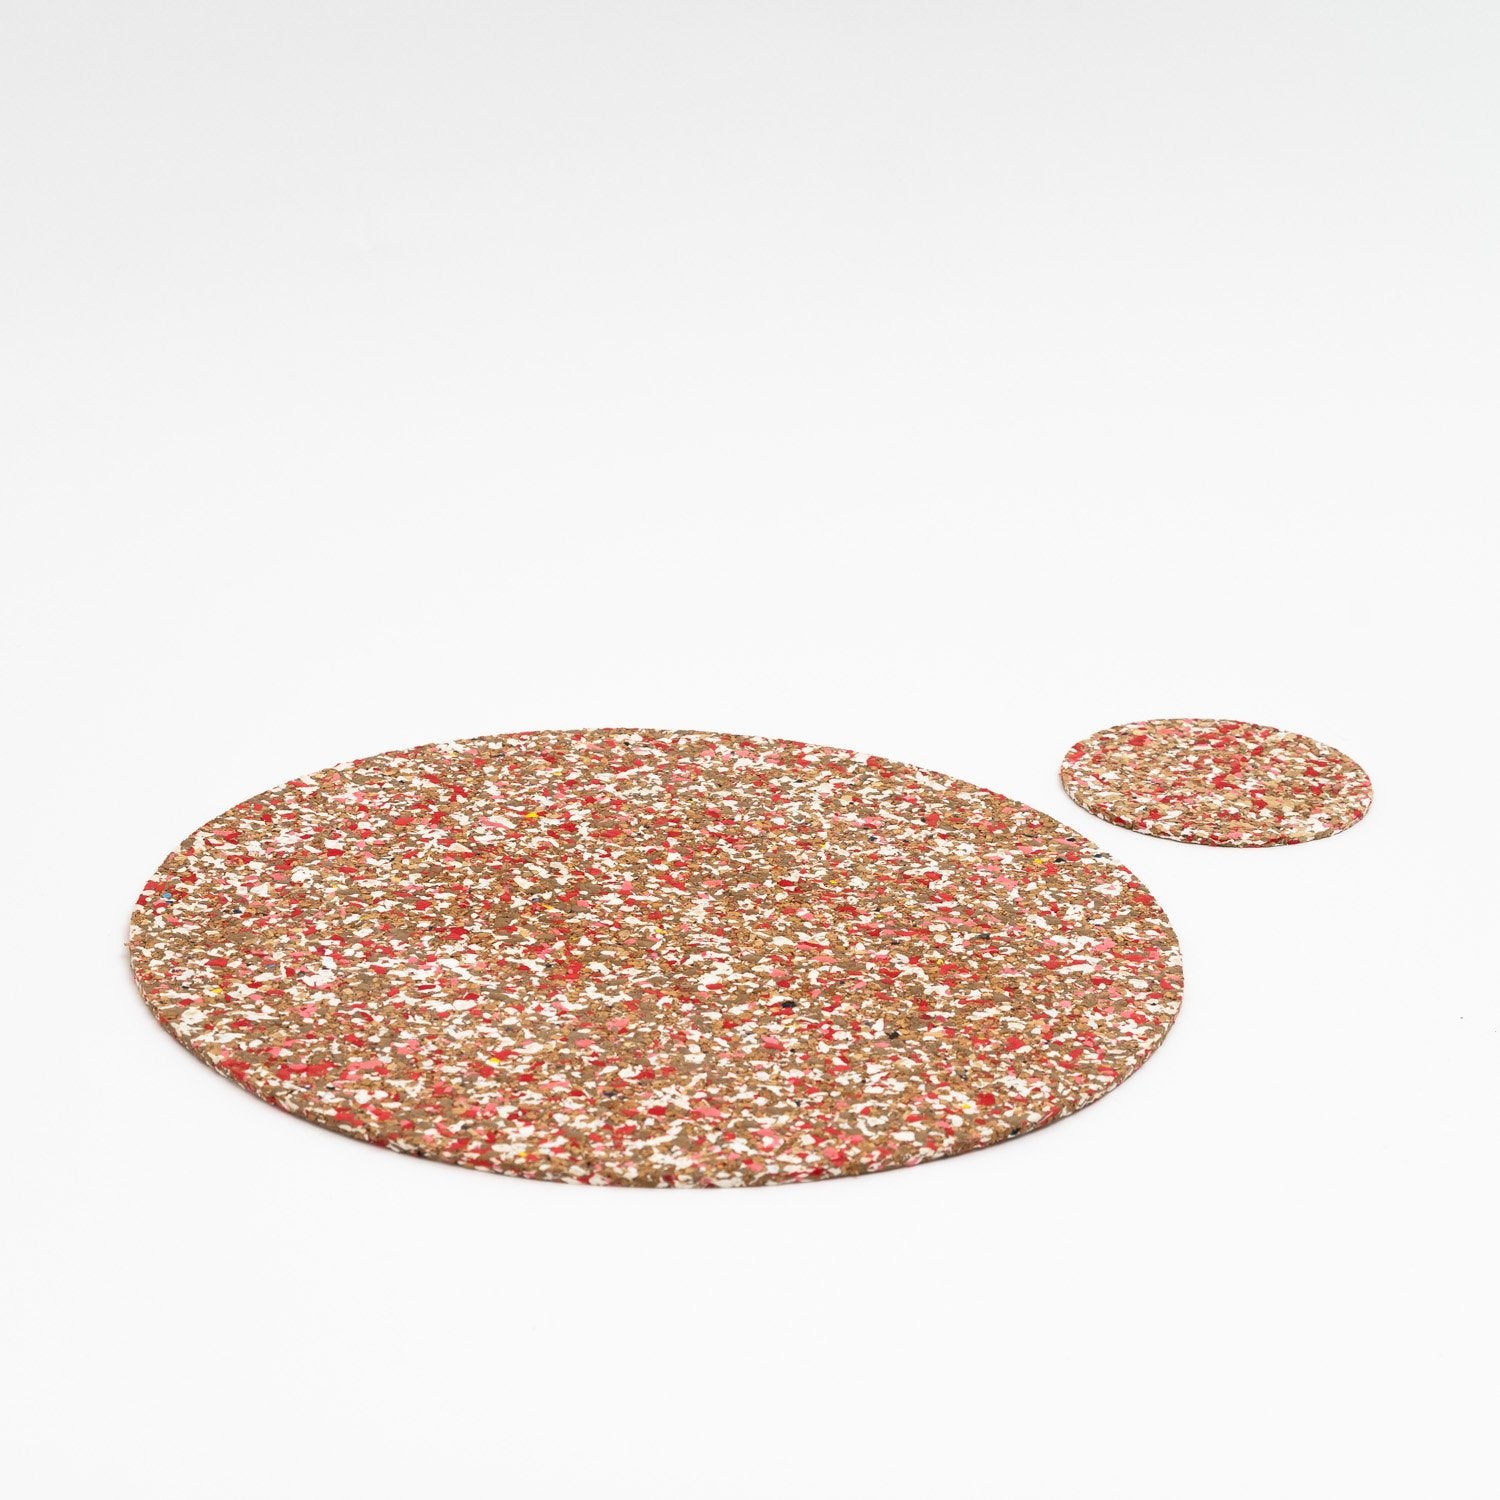 Speckled cork placemats